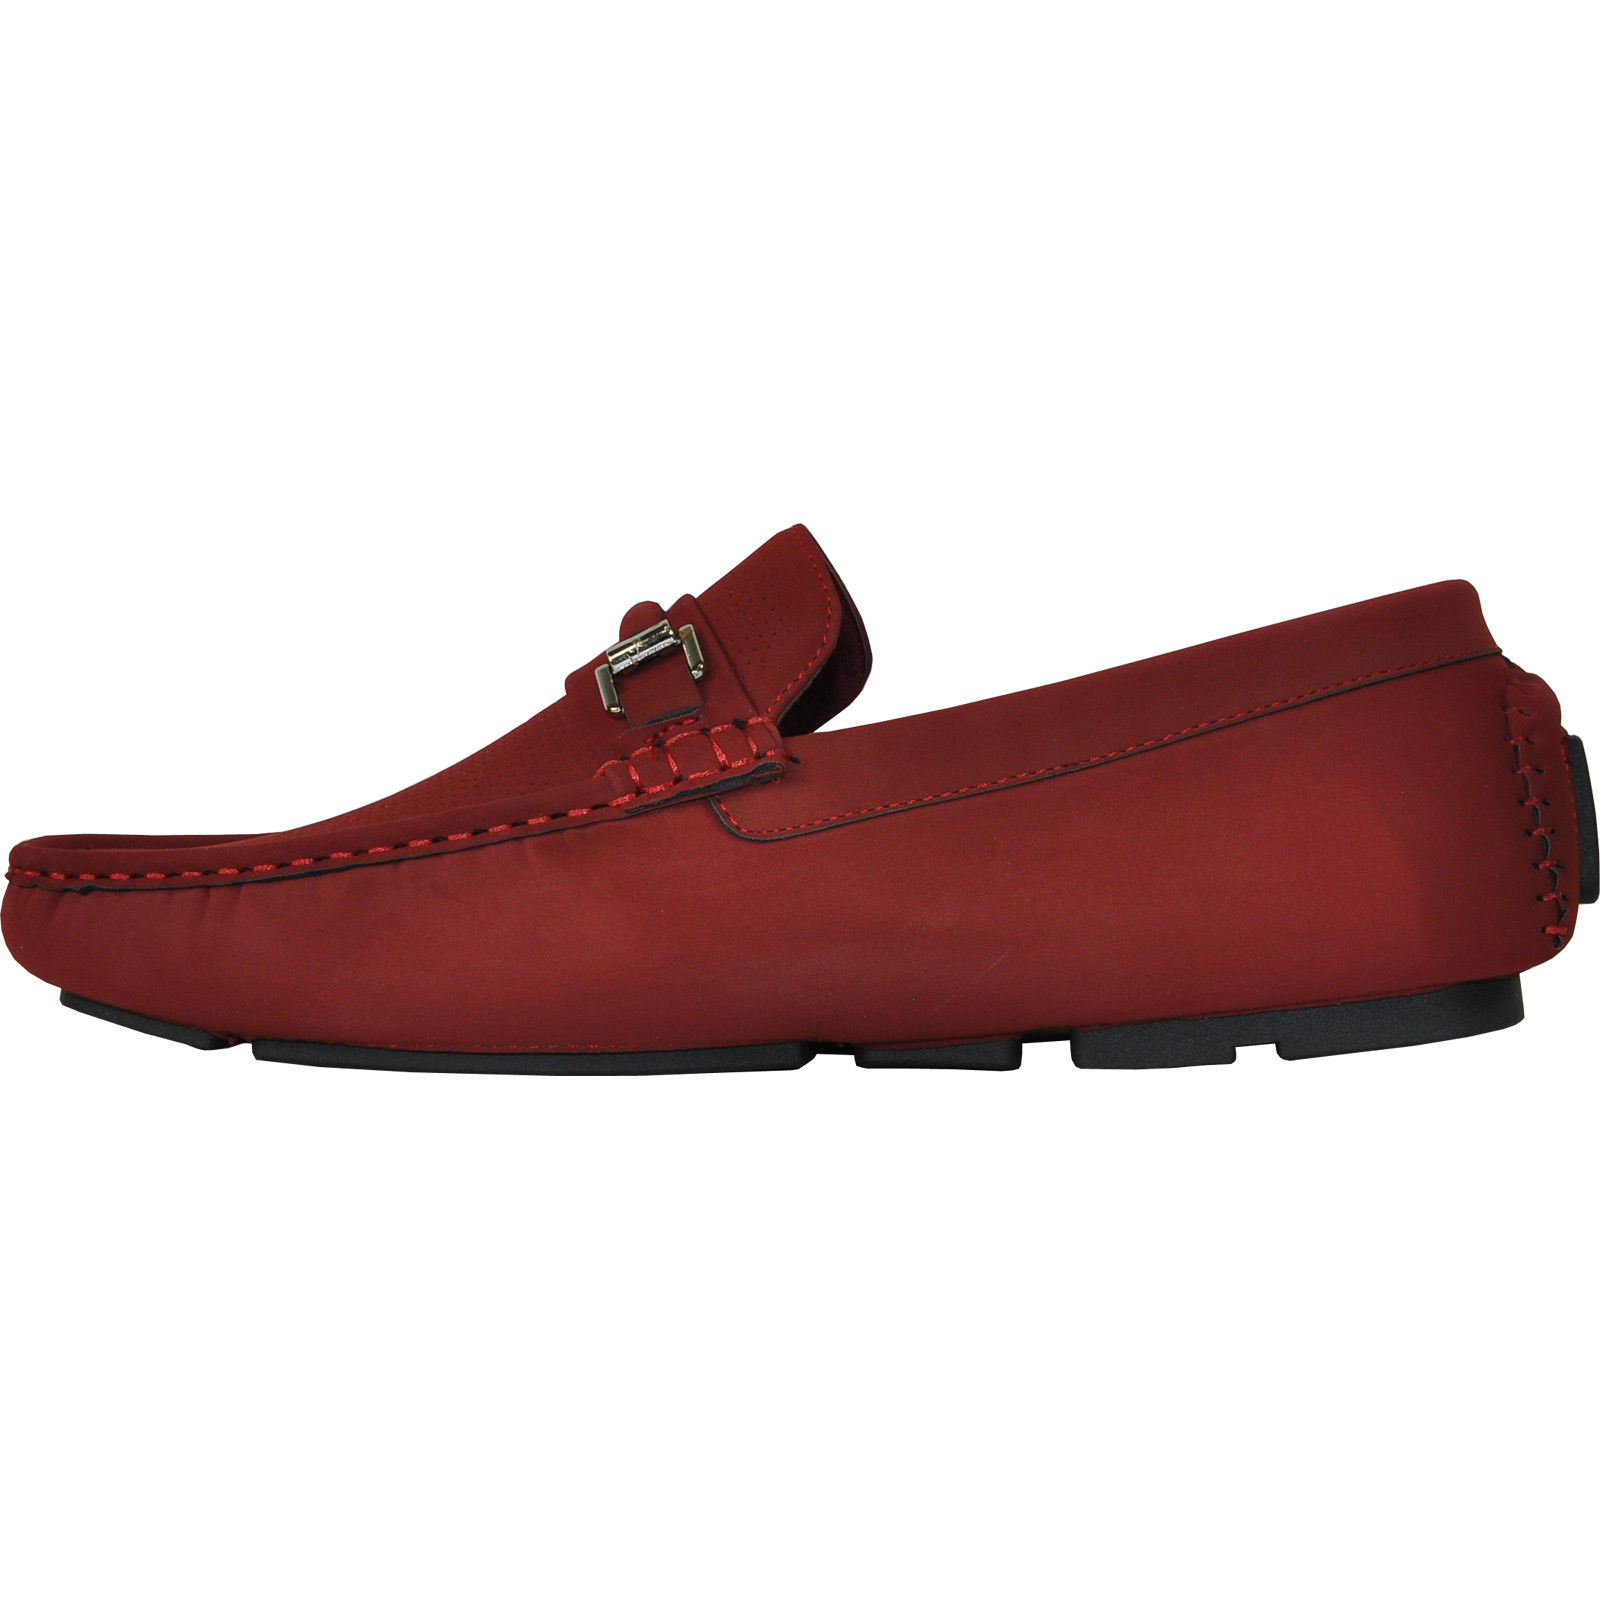 Bravo! Men Casual Shoe Todd-1 Driving Moccasin Red 10M US - image 5 of 7